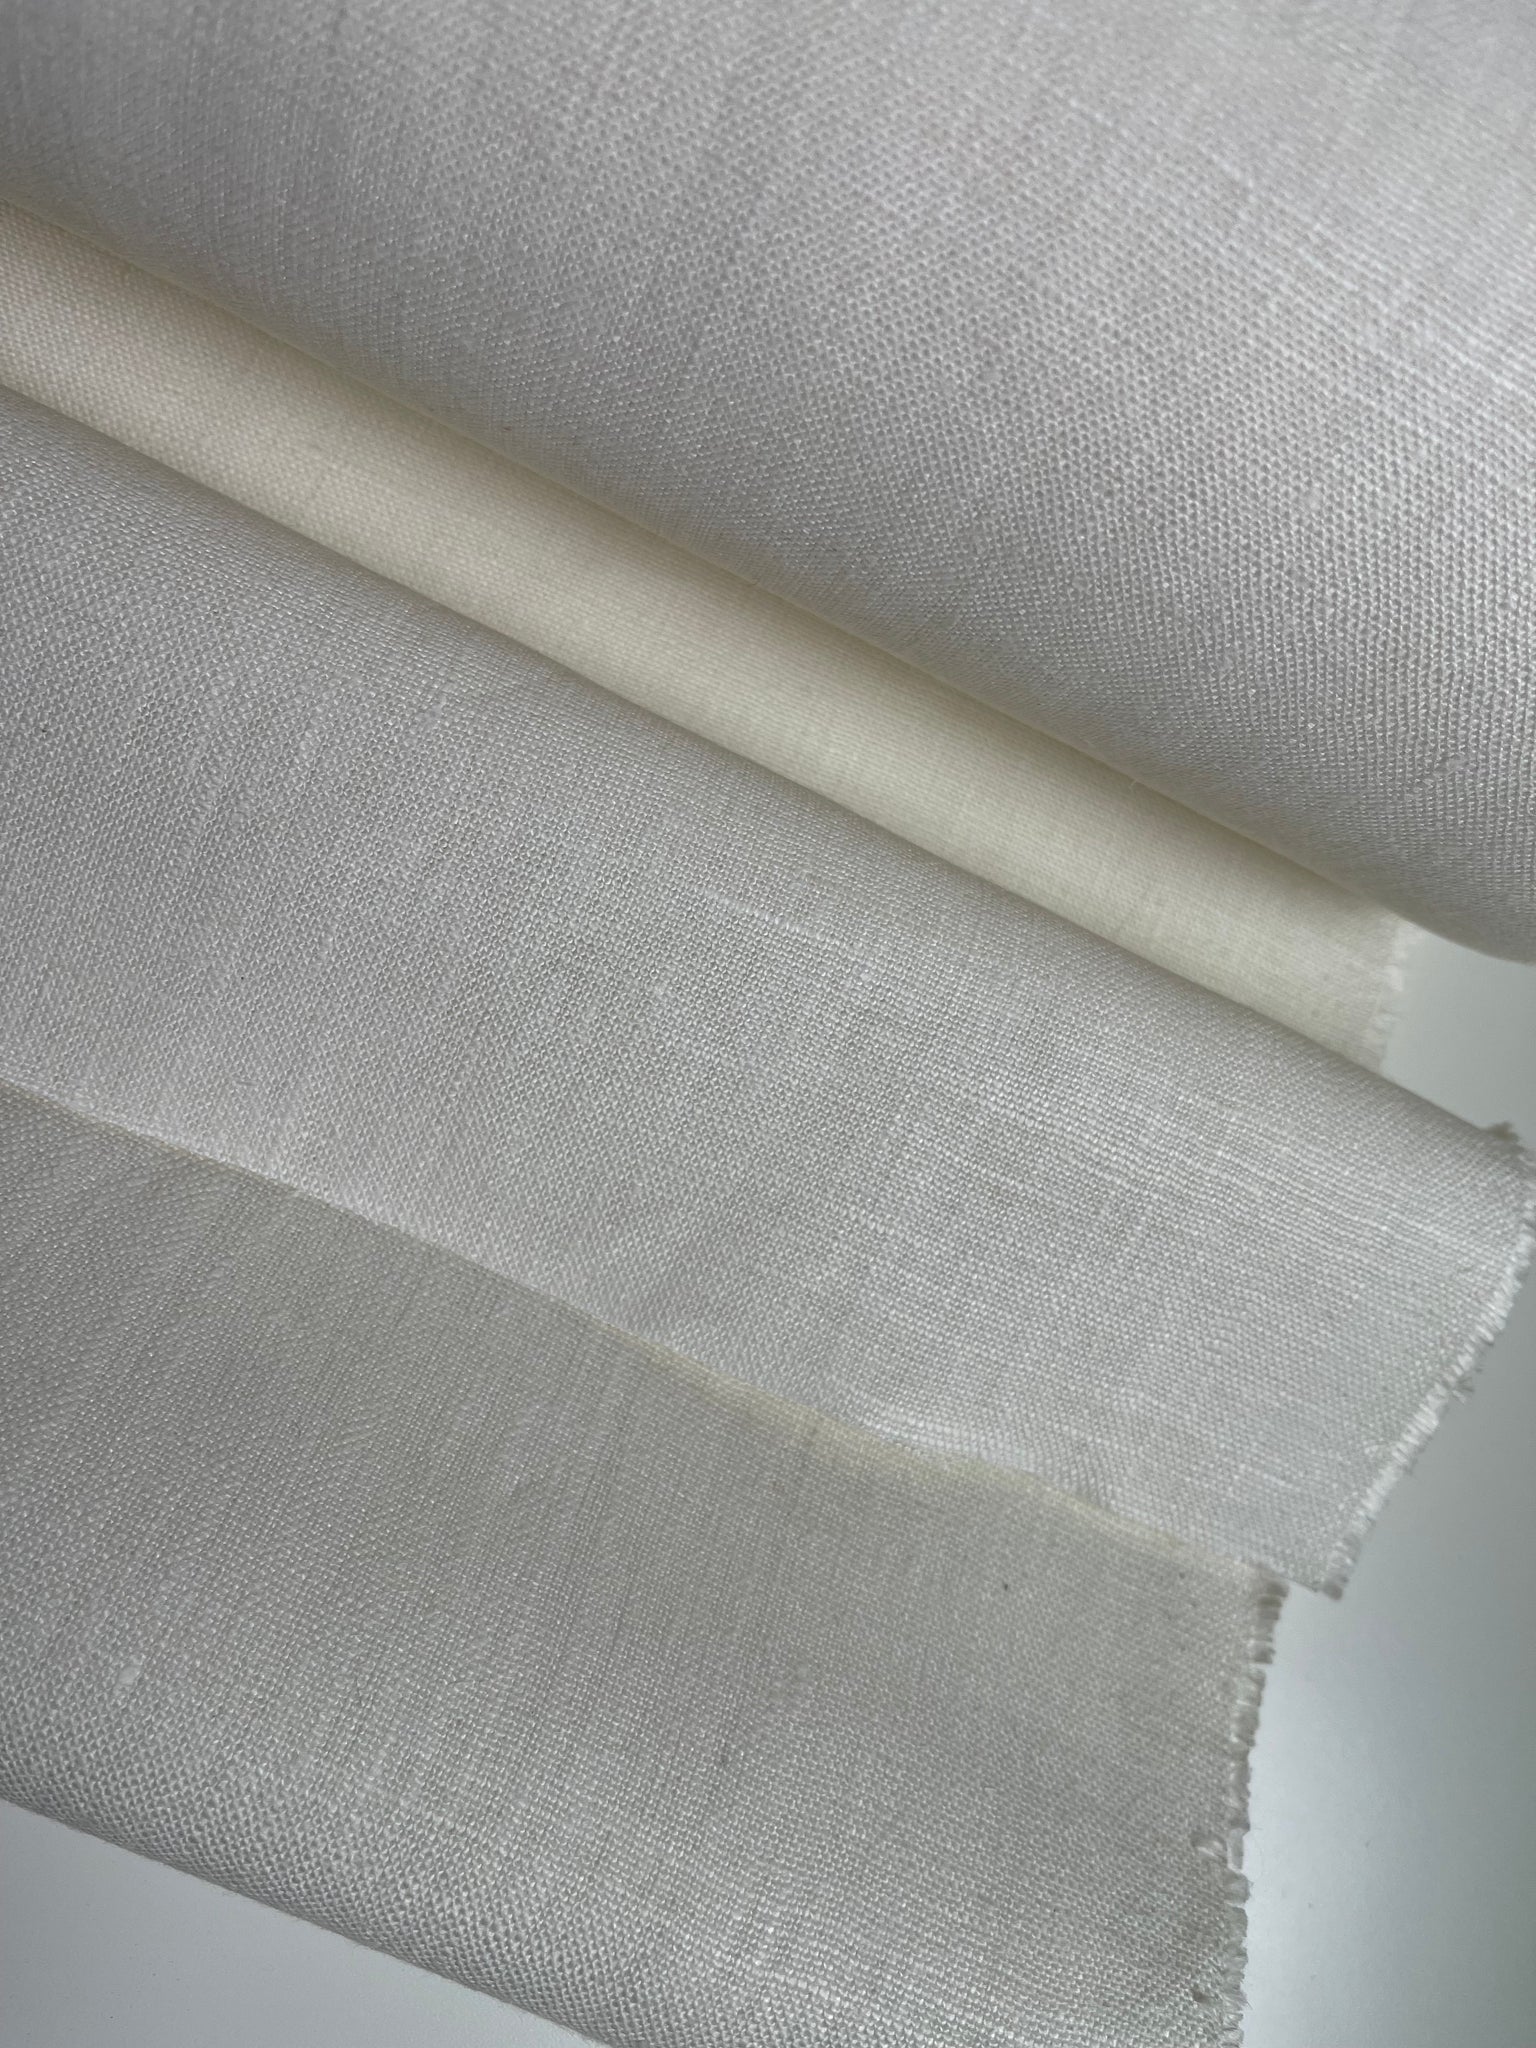 PFD Prepared for Dyeing Off-White Linen Fabric